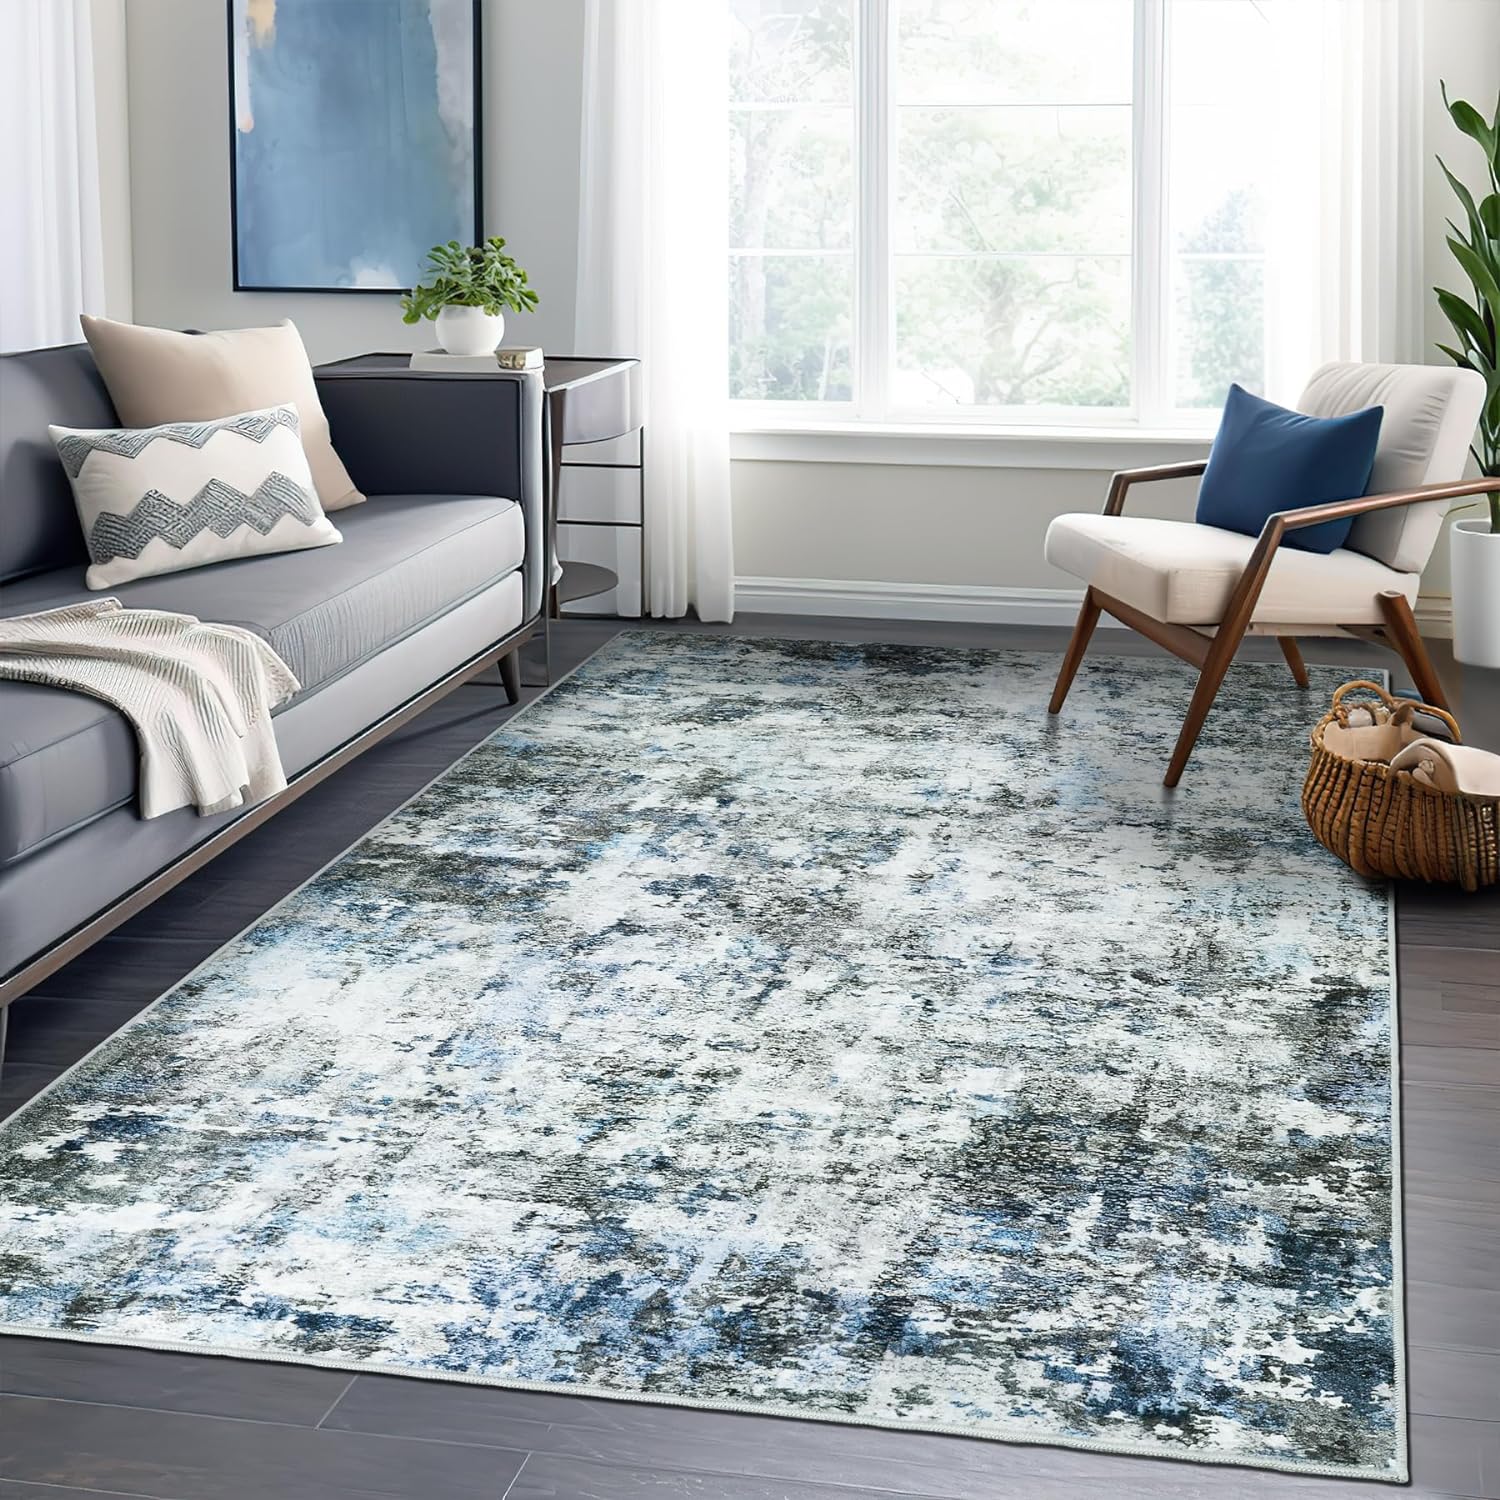 ComiComi 8x10 Area Rug for Living Room Stain Resistant Jebel Cloud Depth